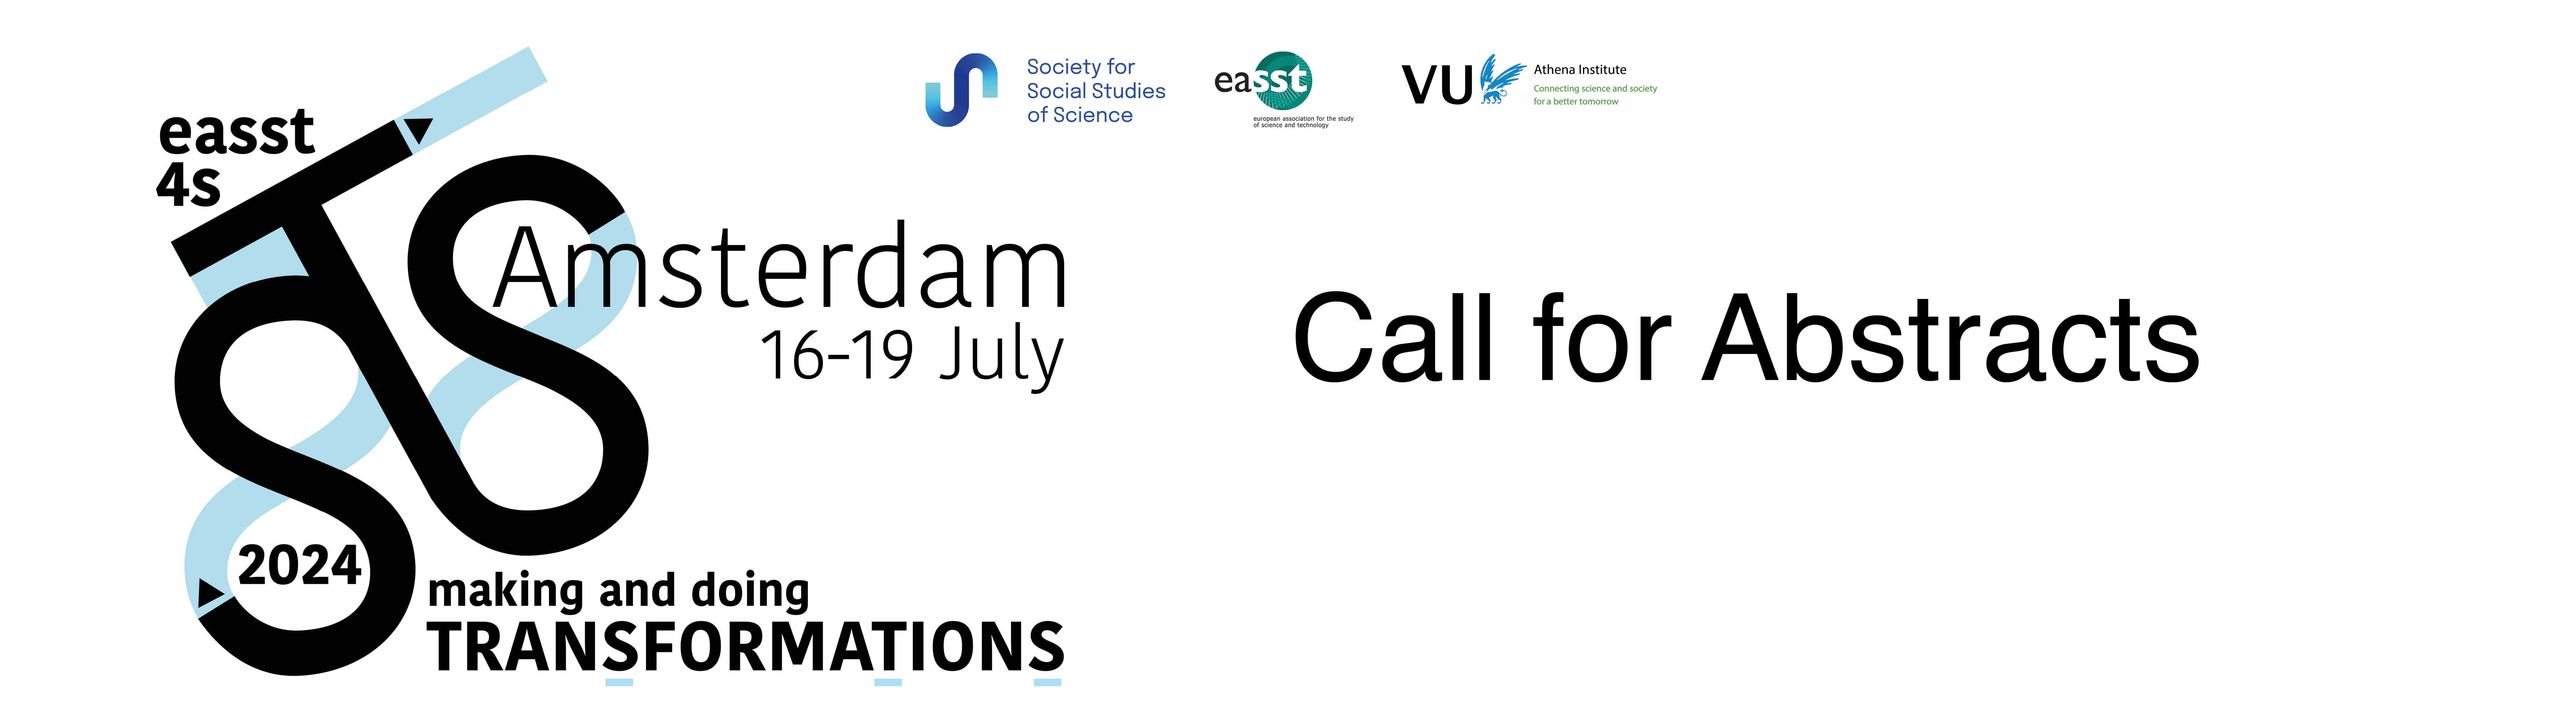 Call for Abstracts Banner